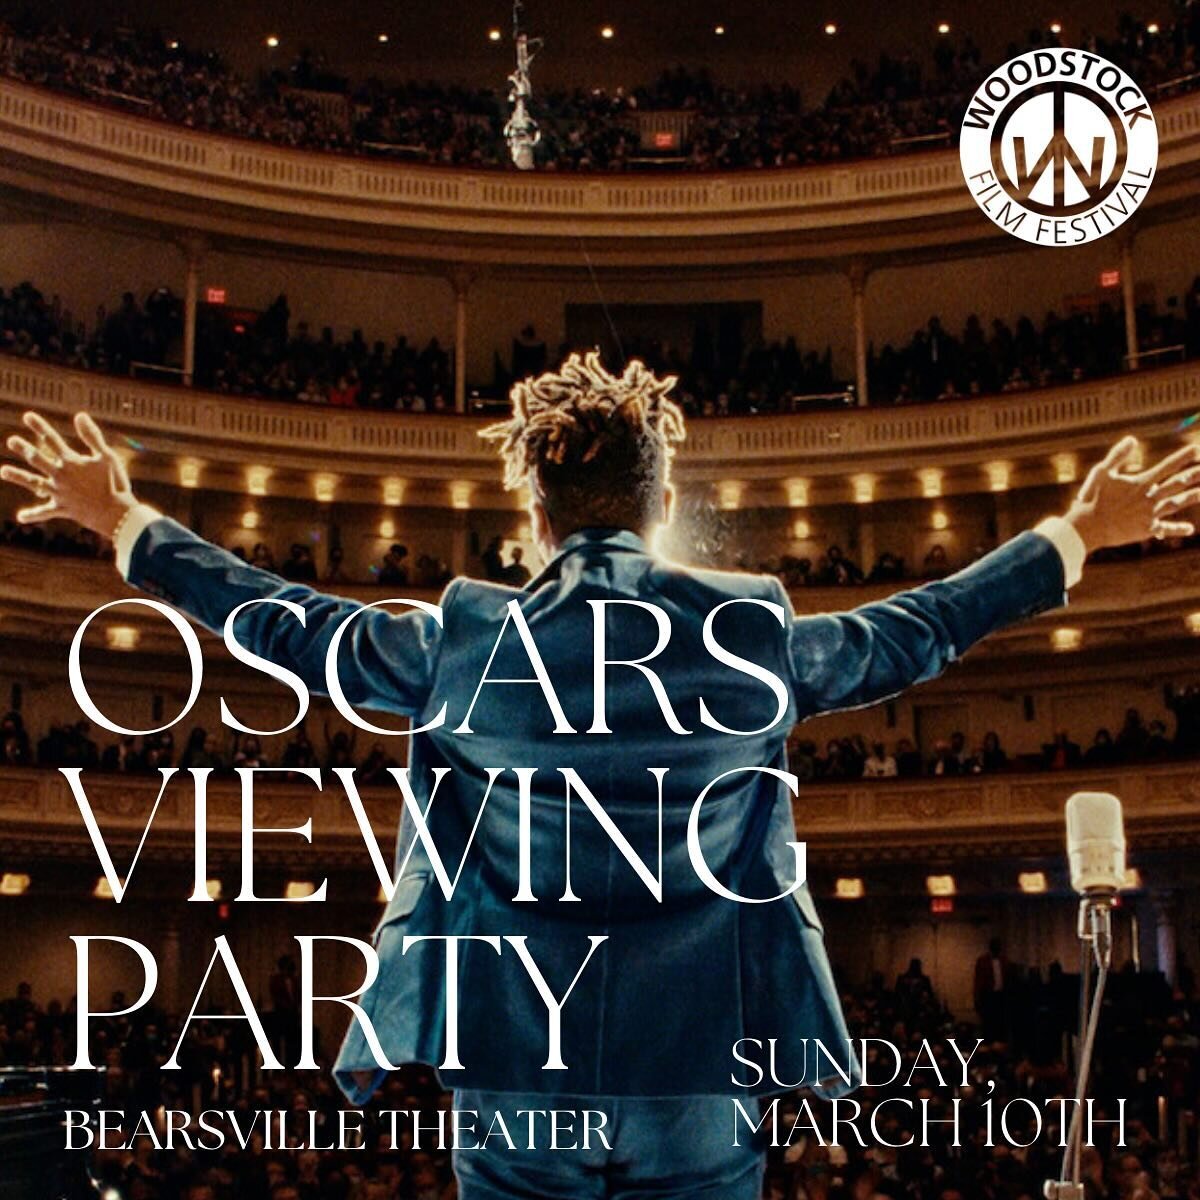 Join @woodstockfilmfestival&rsquo;s Annual Viewing Party of The 96th Academy Awards with a state-of-the-art Dolby surround sound system at @bearsvilletheater in Woodstock, NY!

Event takes place Sunday March 10, visit woodstockfilmfestival.org/events